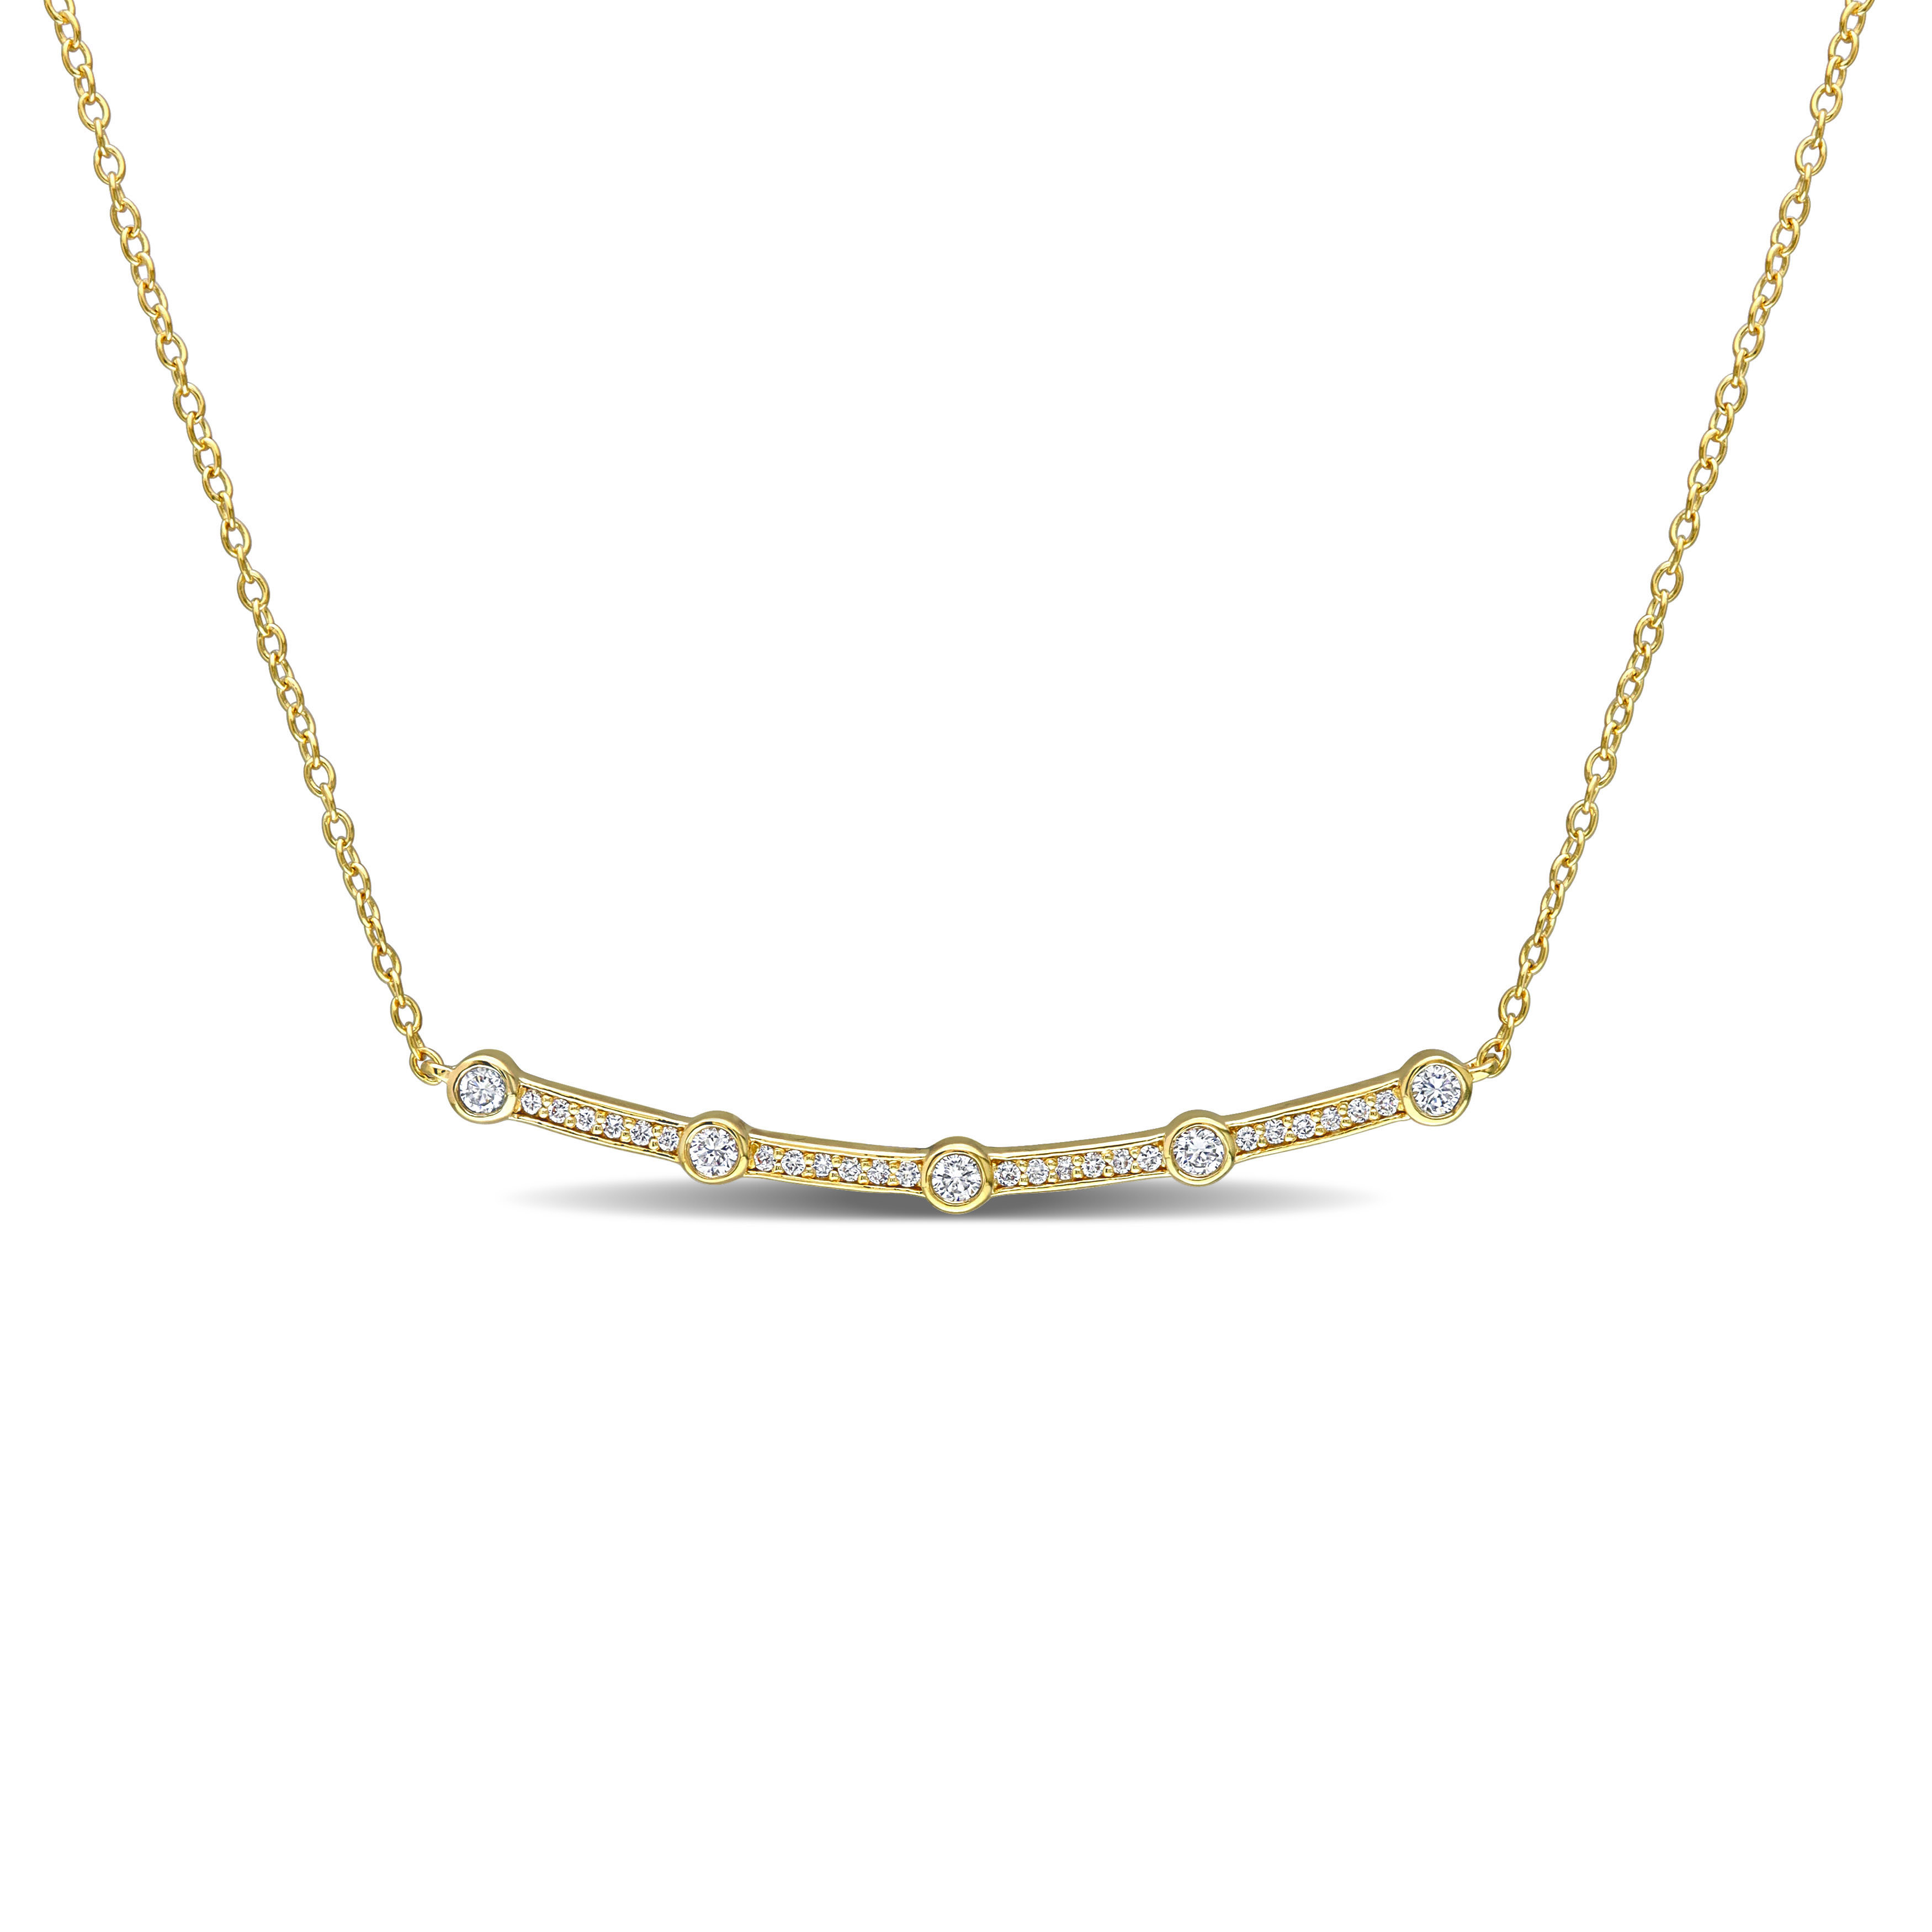 1/3 CT TDW Diamond Bar Necklace in 10k Yellow Gold - 16 in.